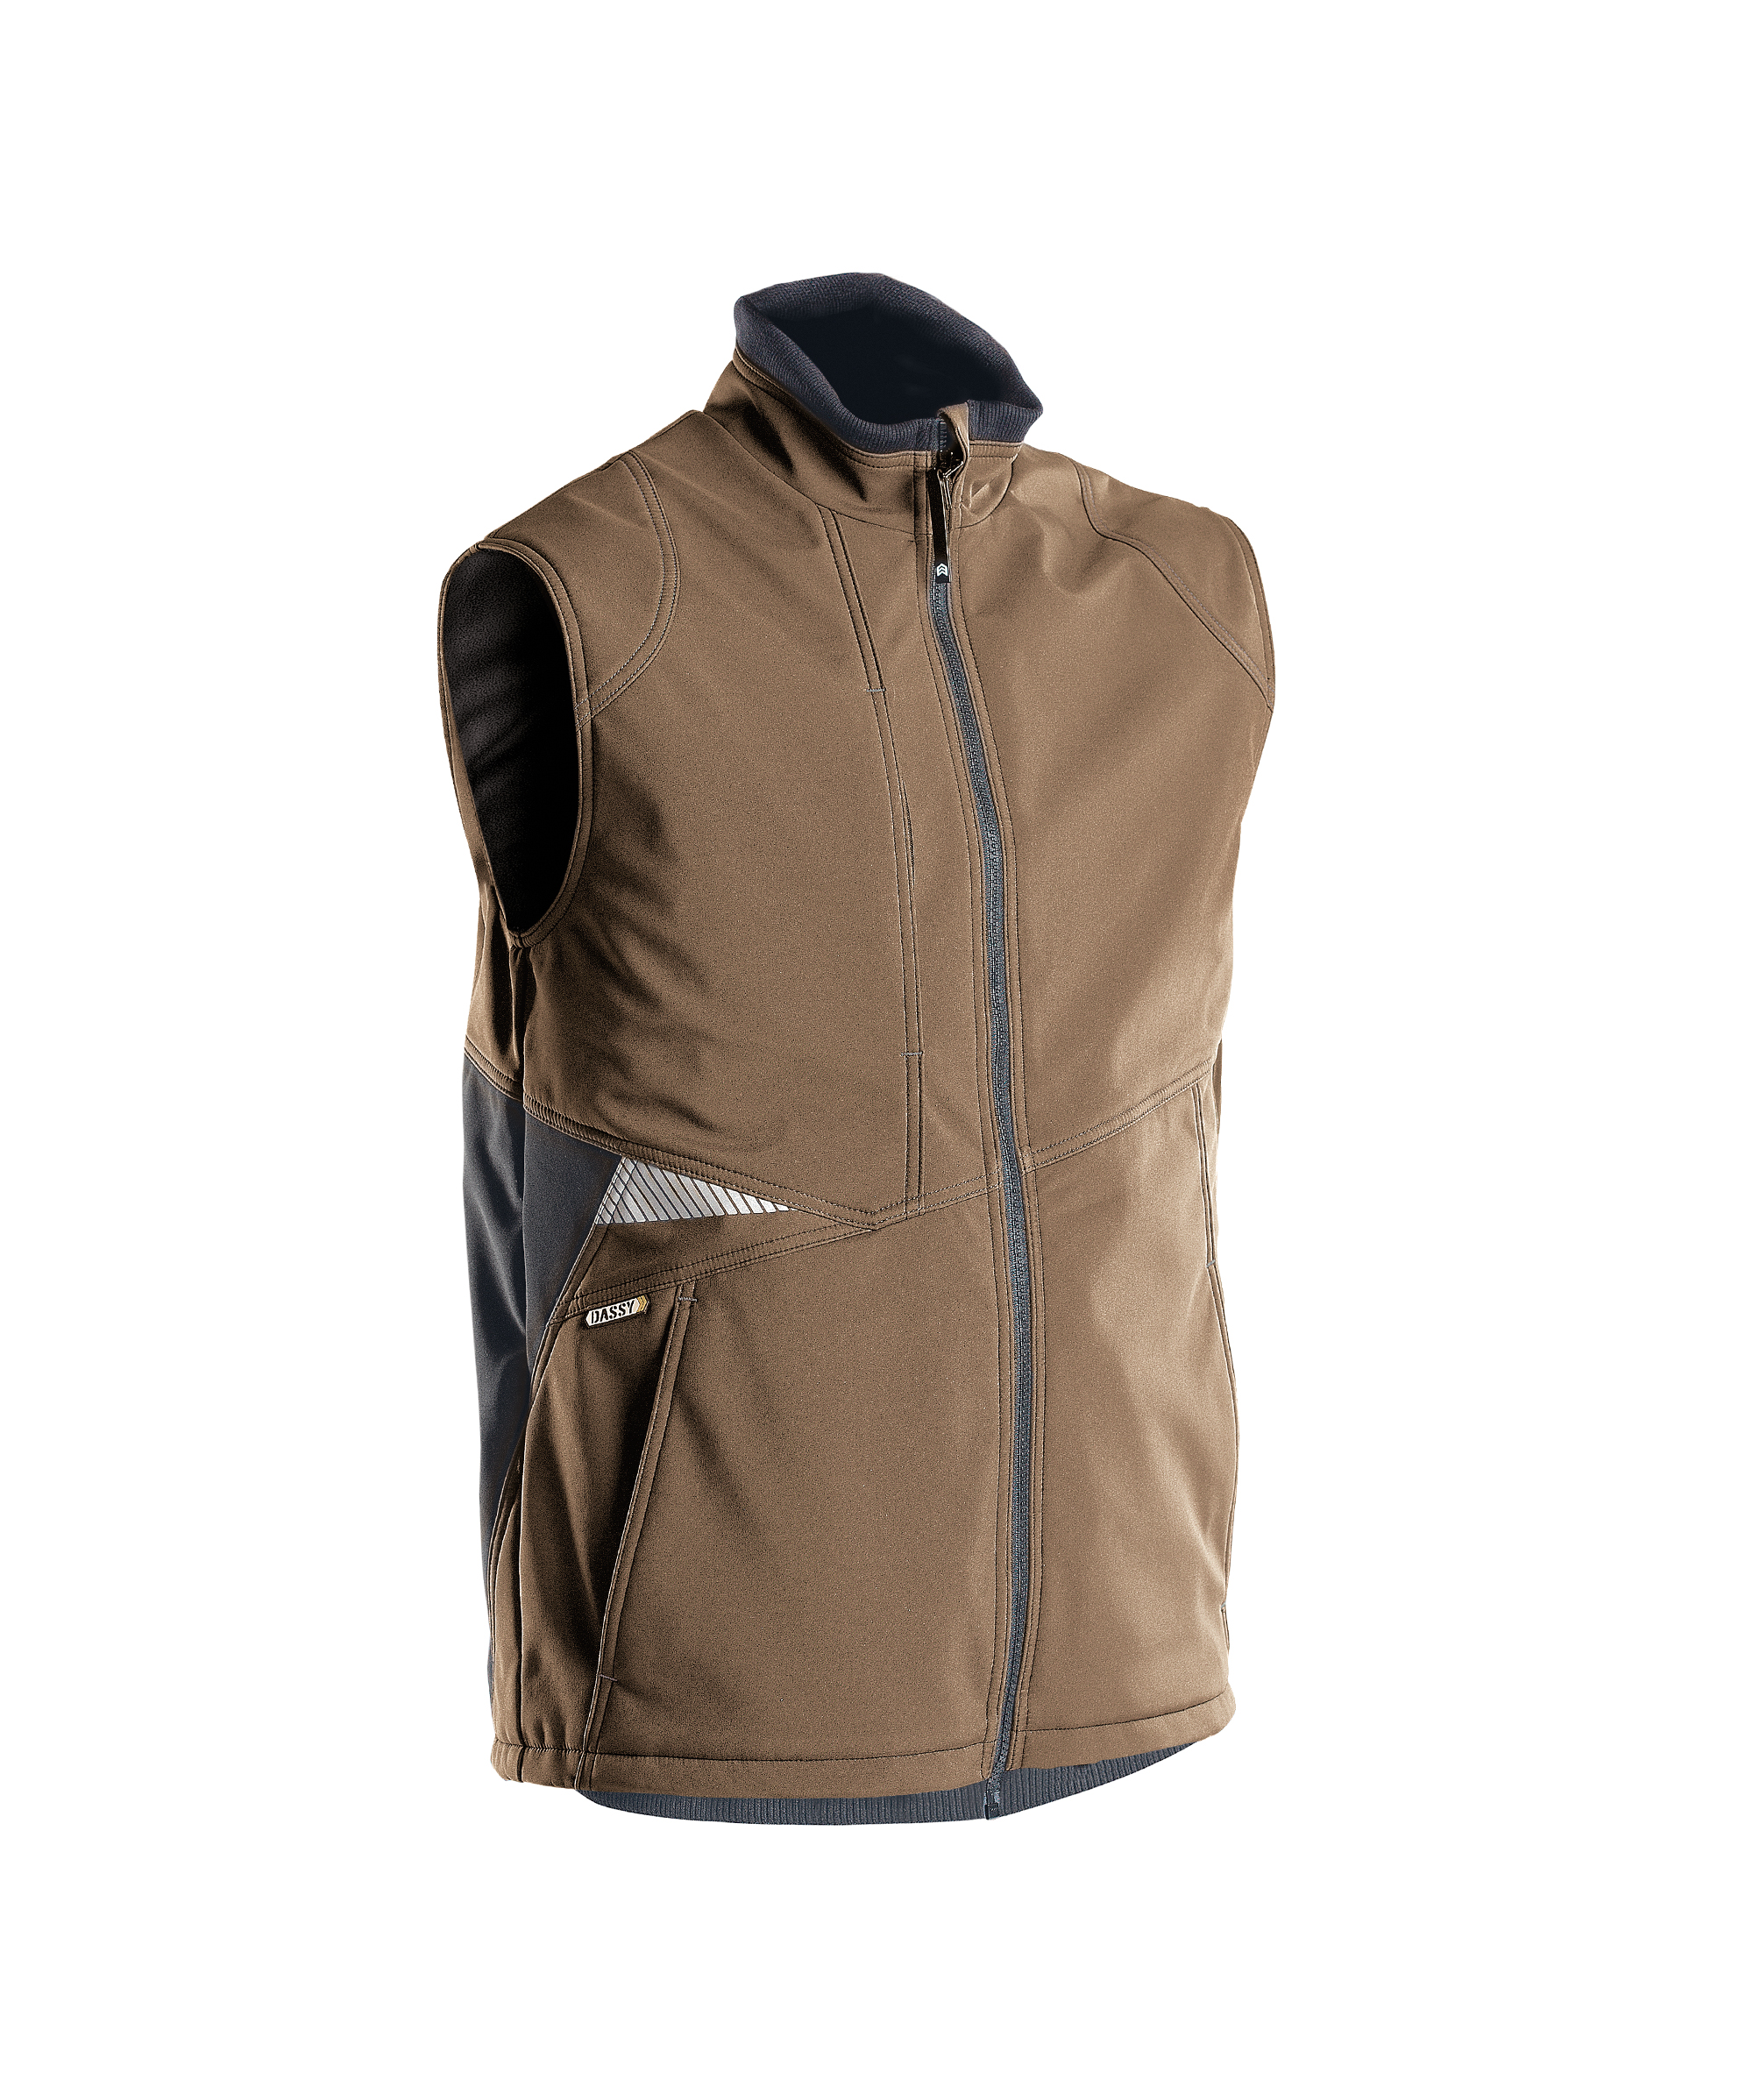 fusion_two-tone-softshell-body-warmer_clay-brown-anthracite-grey_front.jpg